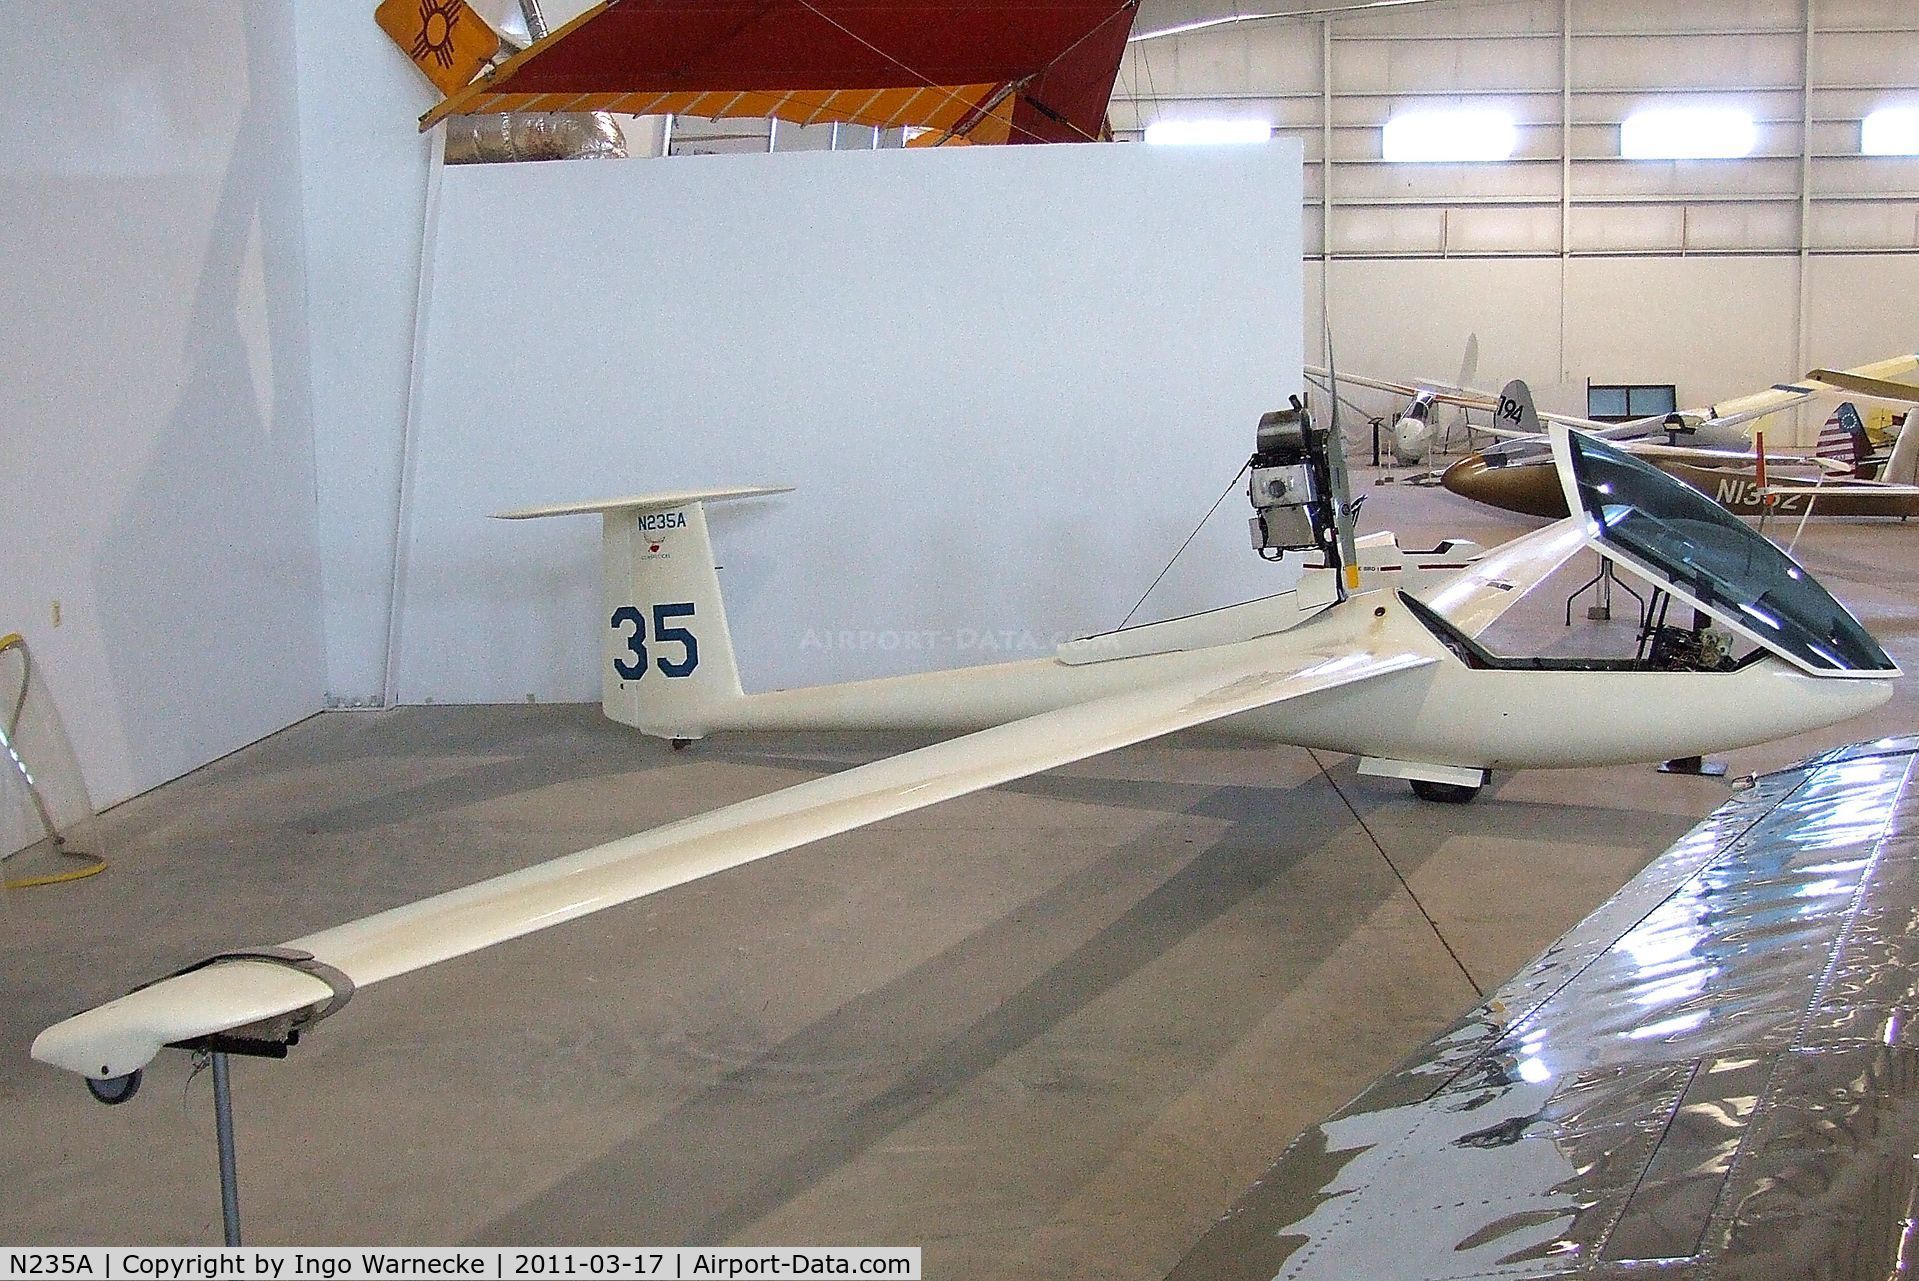 N235A, 1977 Glasflugel MOSQUITO C/N 79, Glasflügel Mosquito motorglider at the Southwest Soaring Museum, Moriarty NM